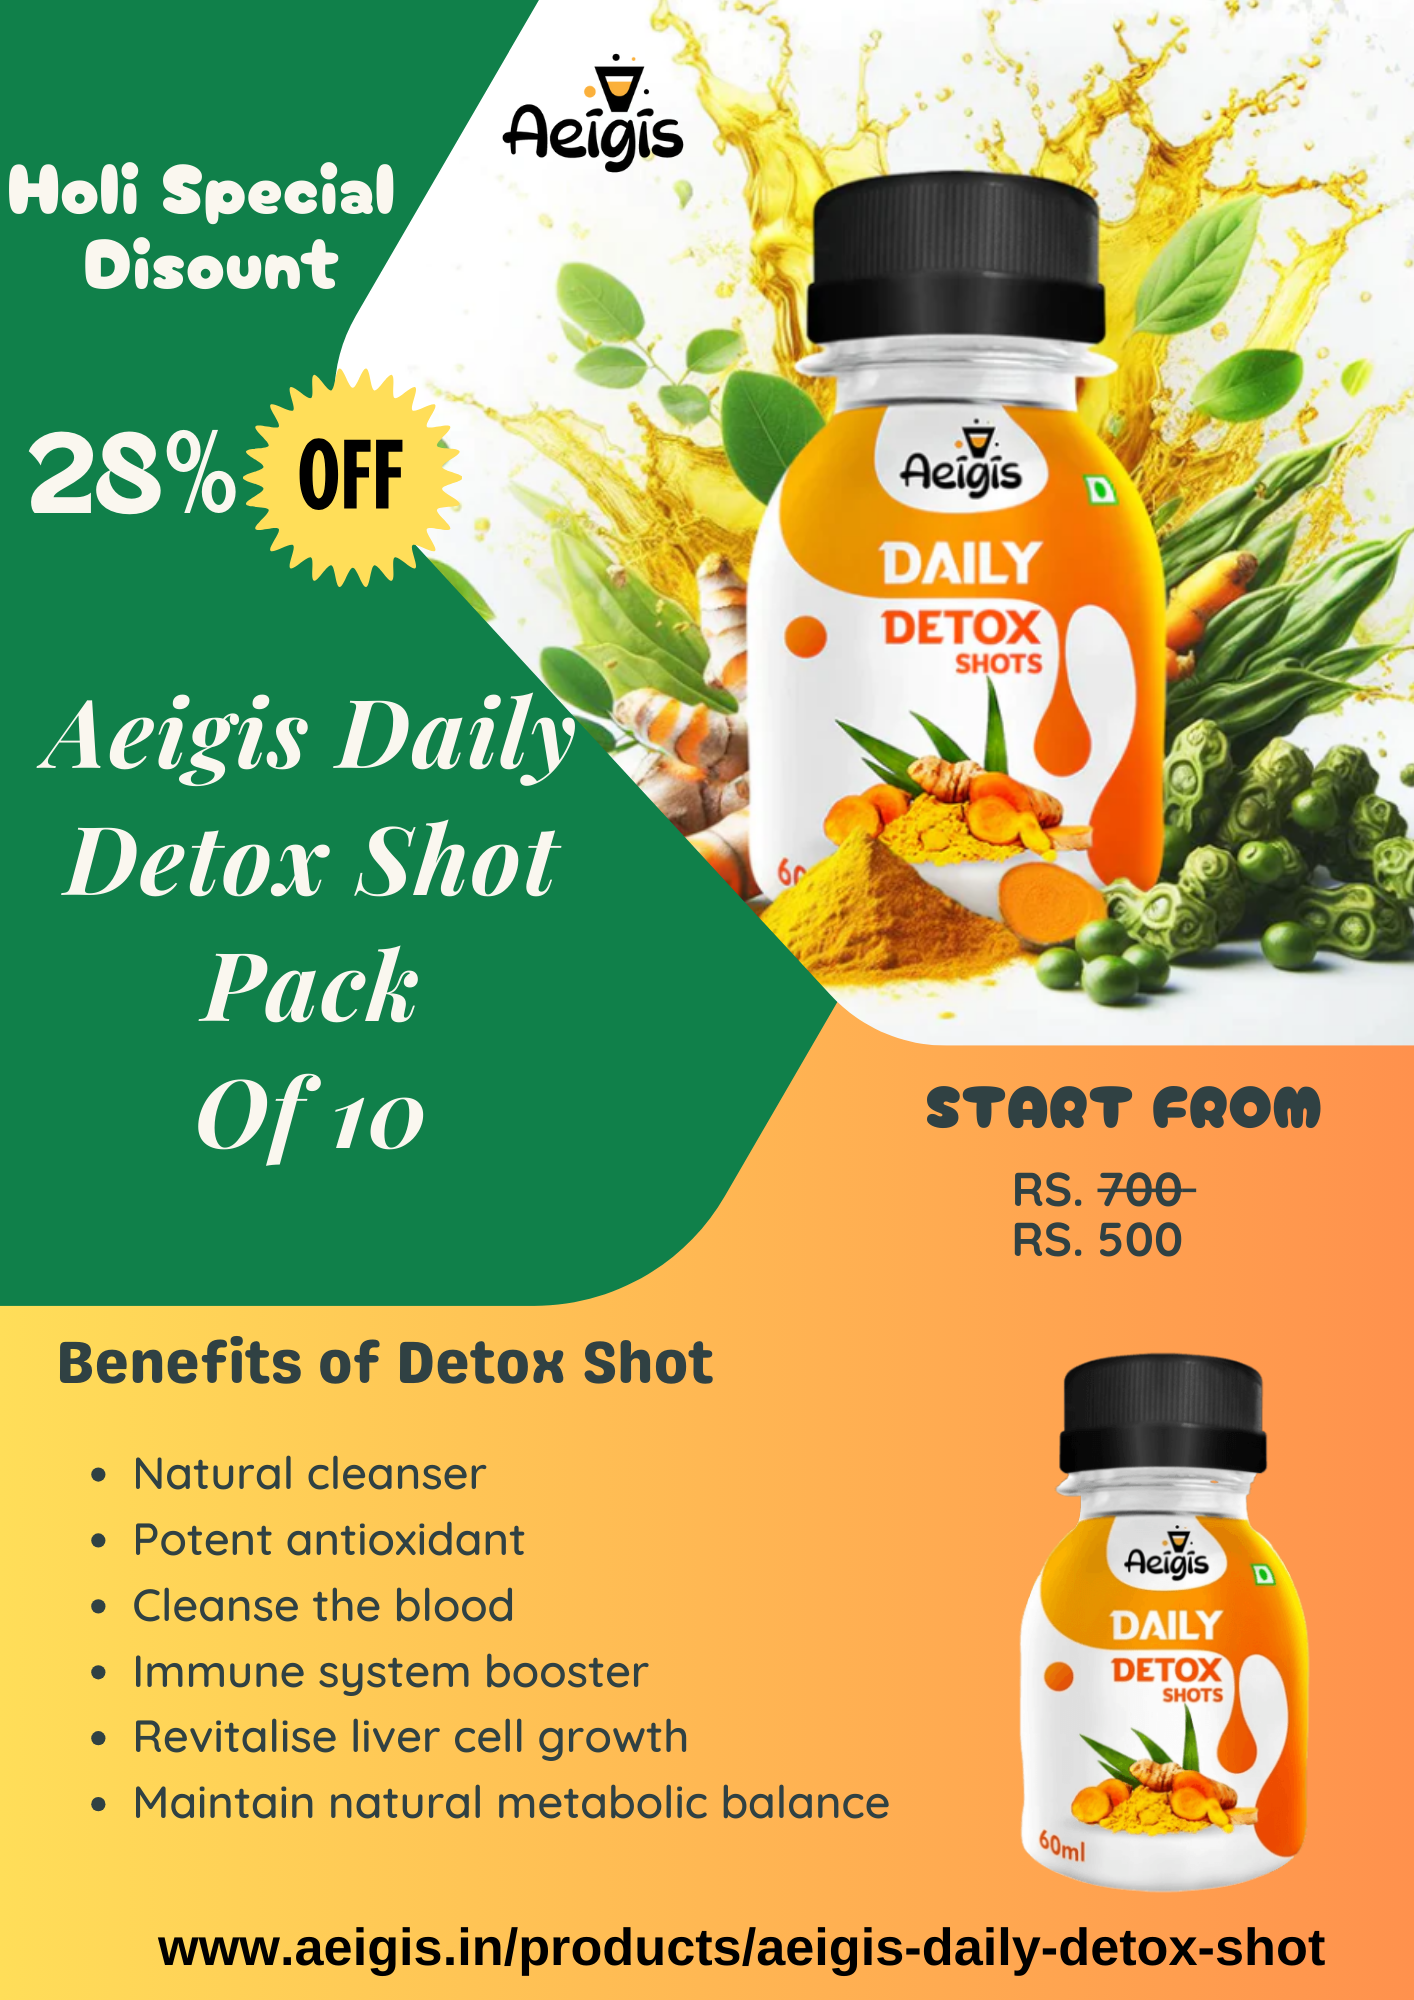  Holi Special Offer: Daily Detox Shots Bursting with Flavor!